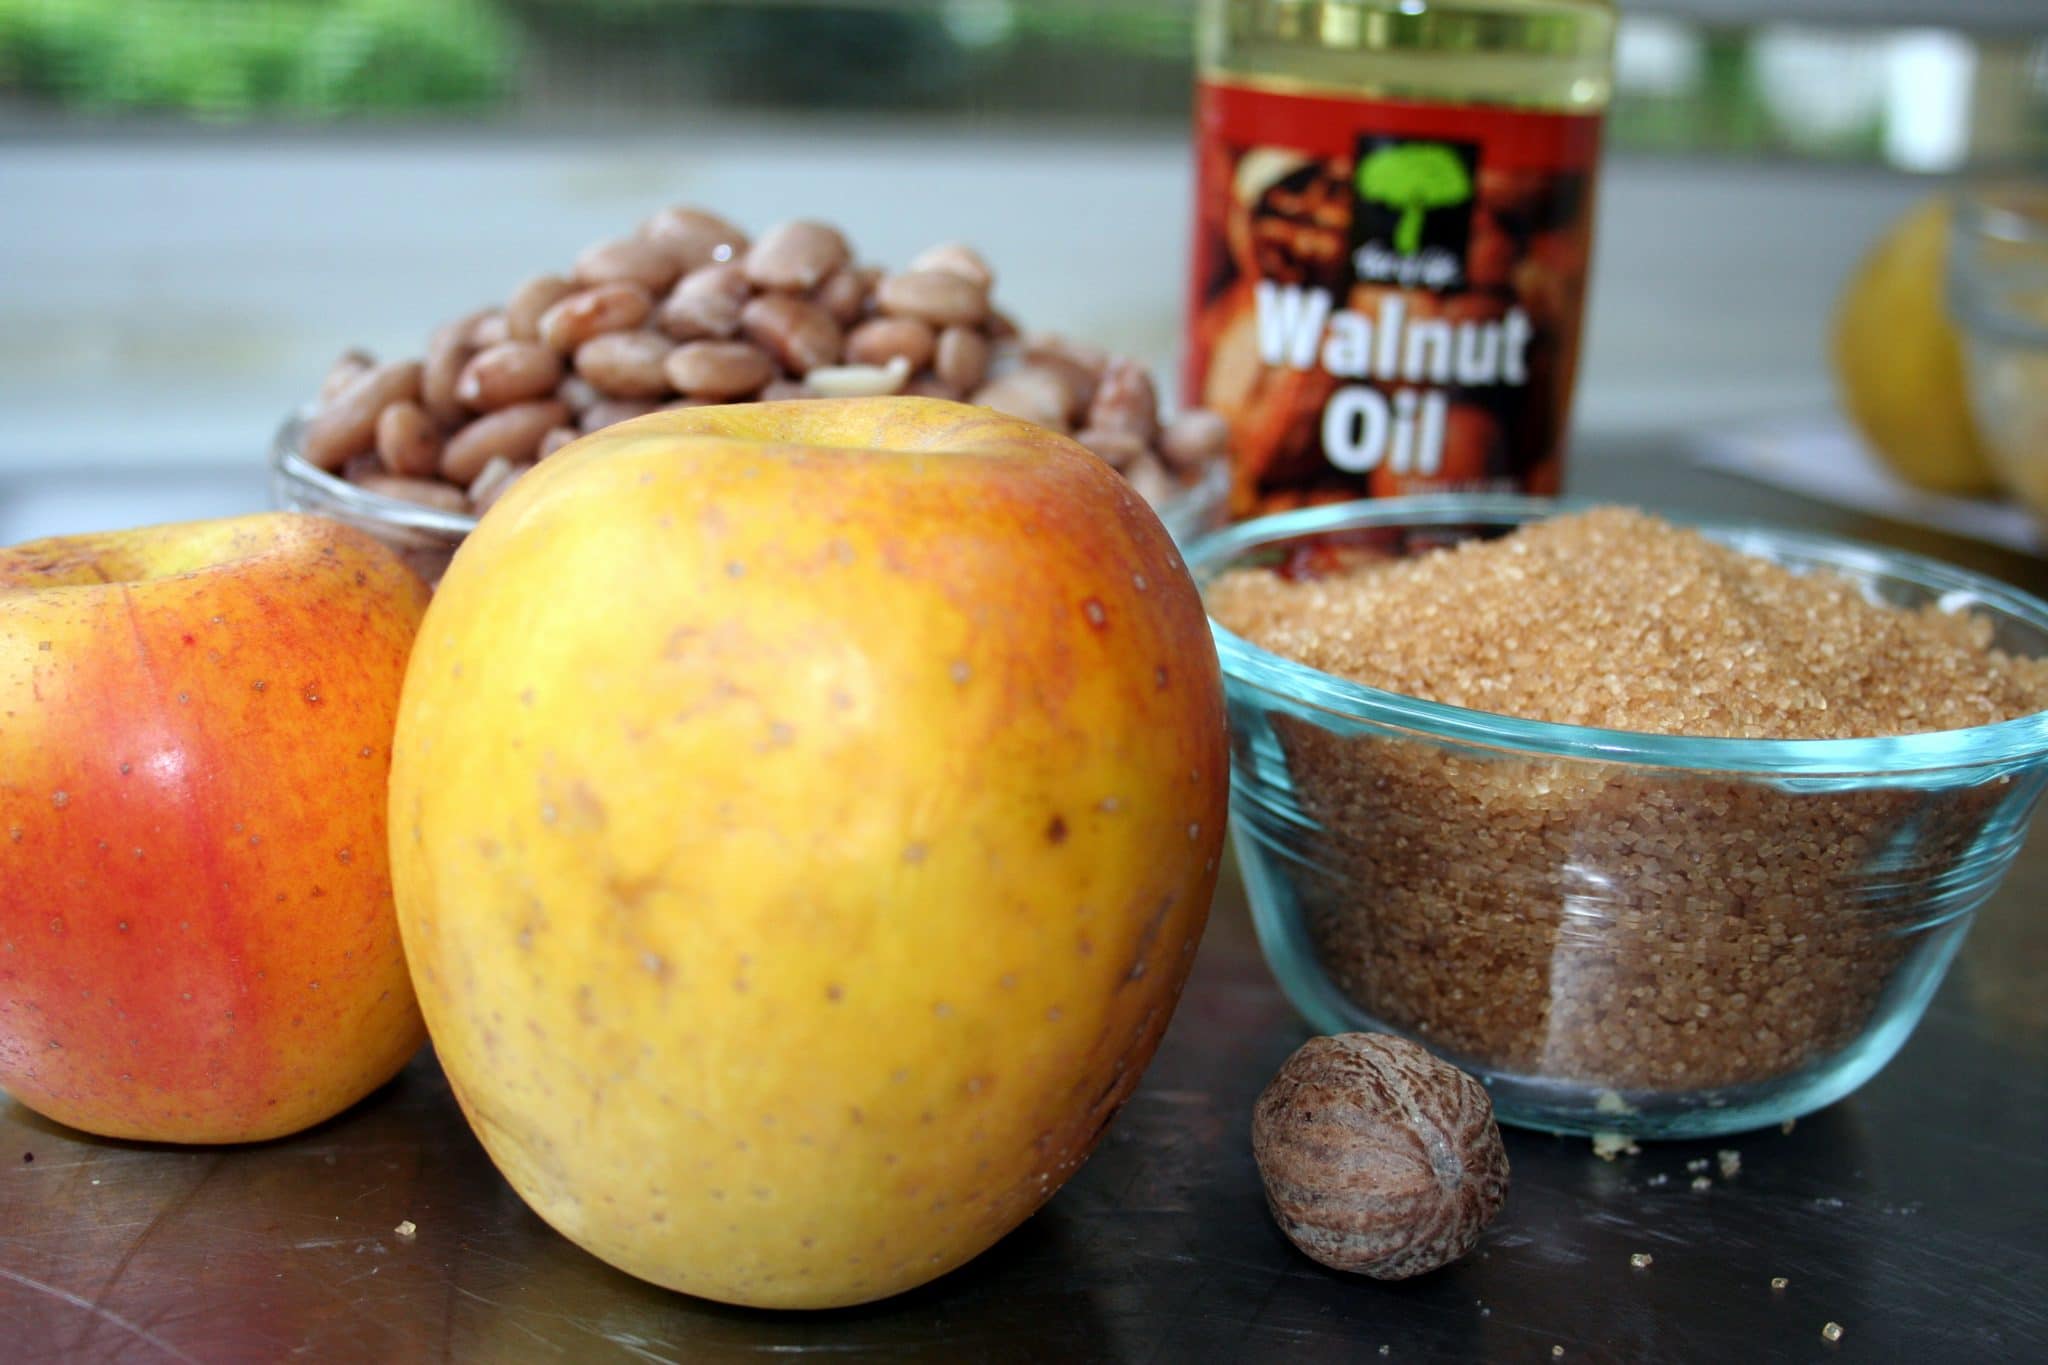 Apple, sugar, and pinto beans - ingredients for Apple-Pinto tart